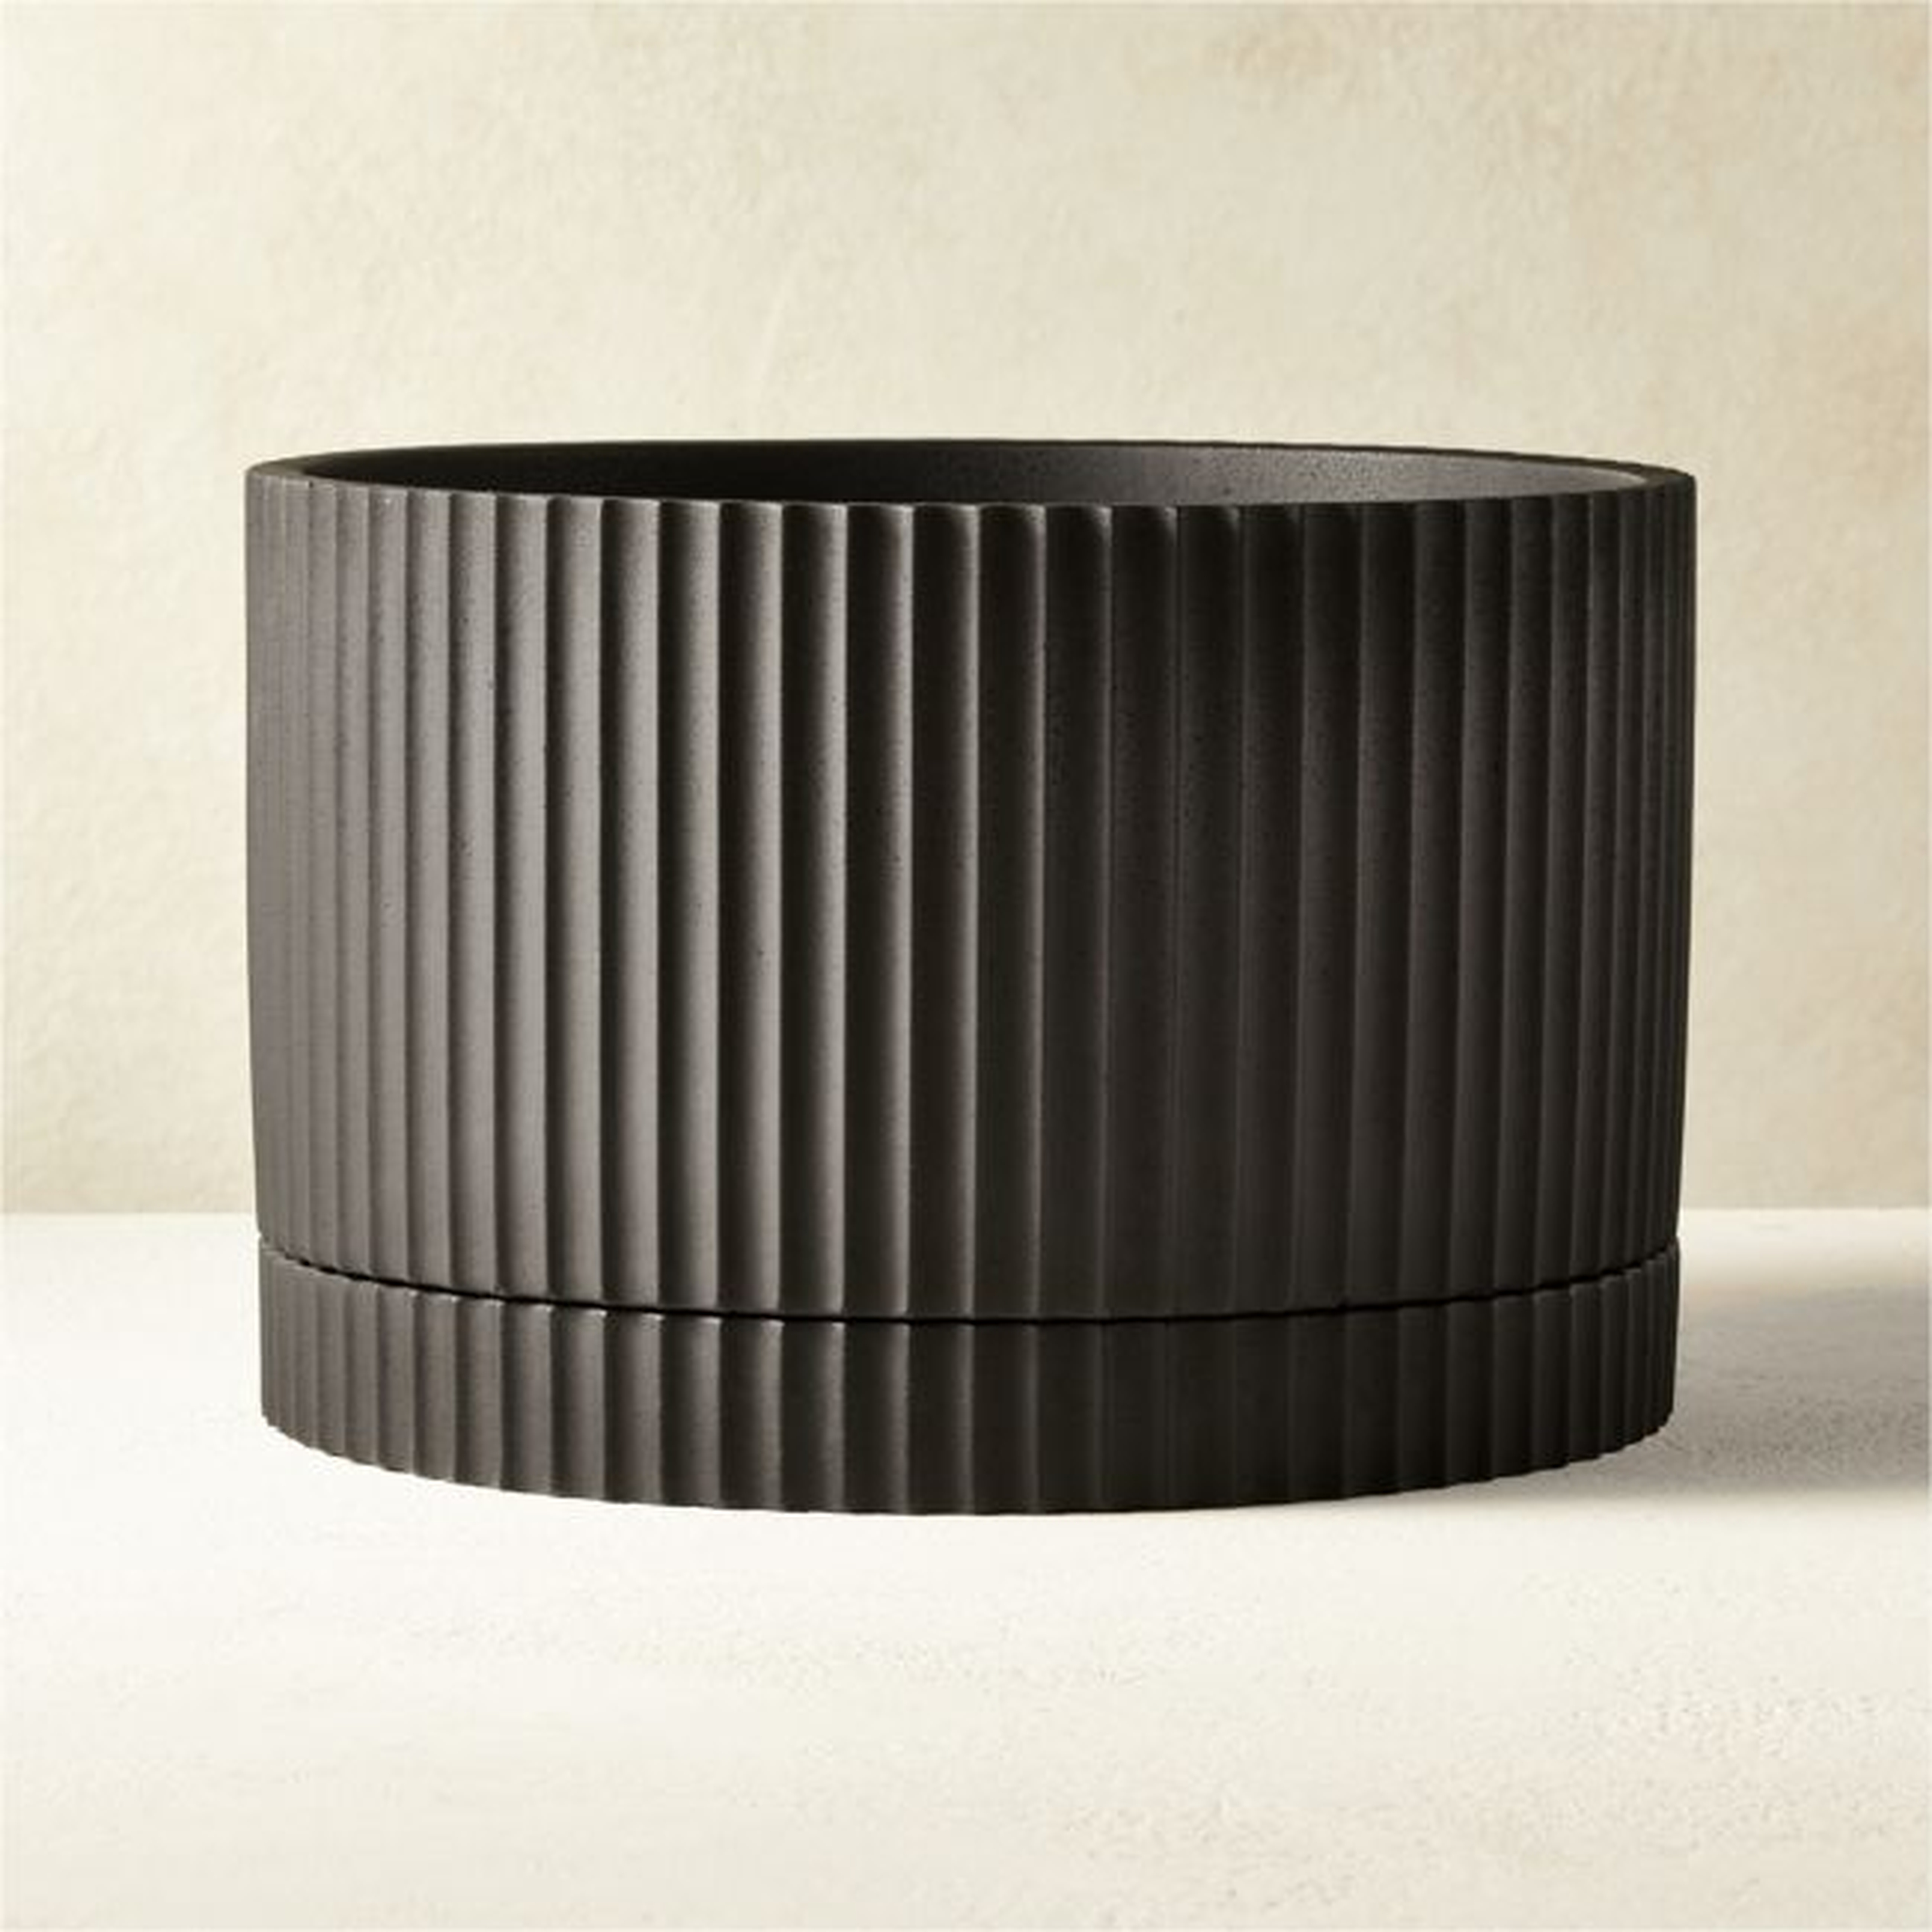 Fold Black Cement Planter with Tray - CB2